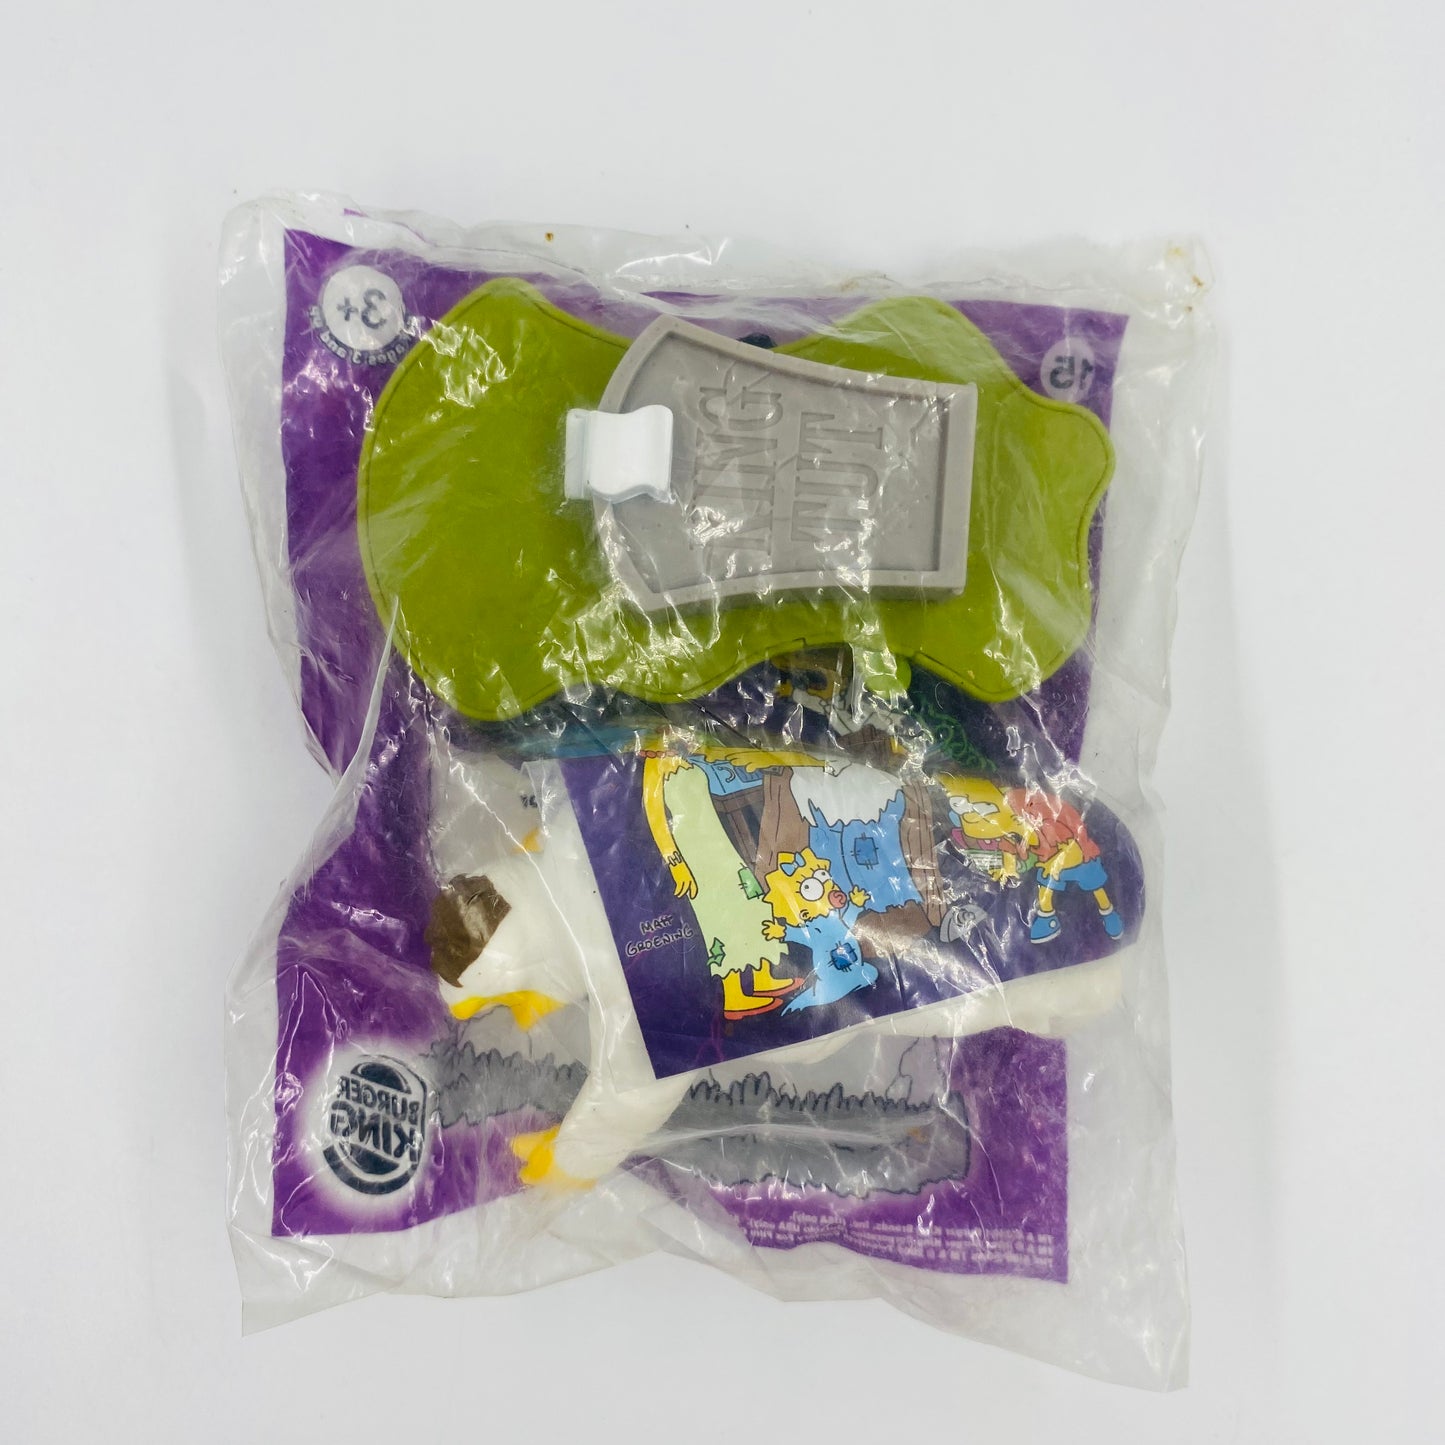 The Simpsons Spooky Light-Ups Barney Burger King Kids' Meals toy (2001) bagged